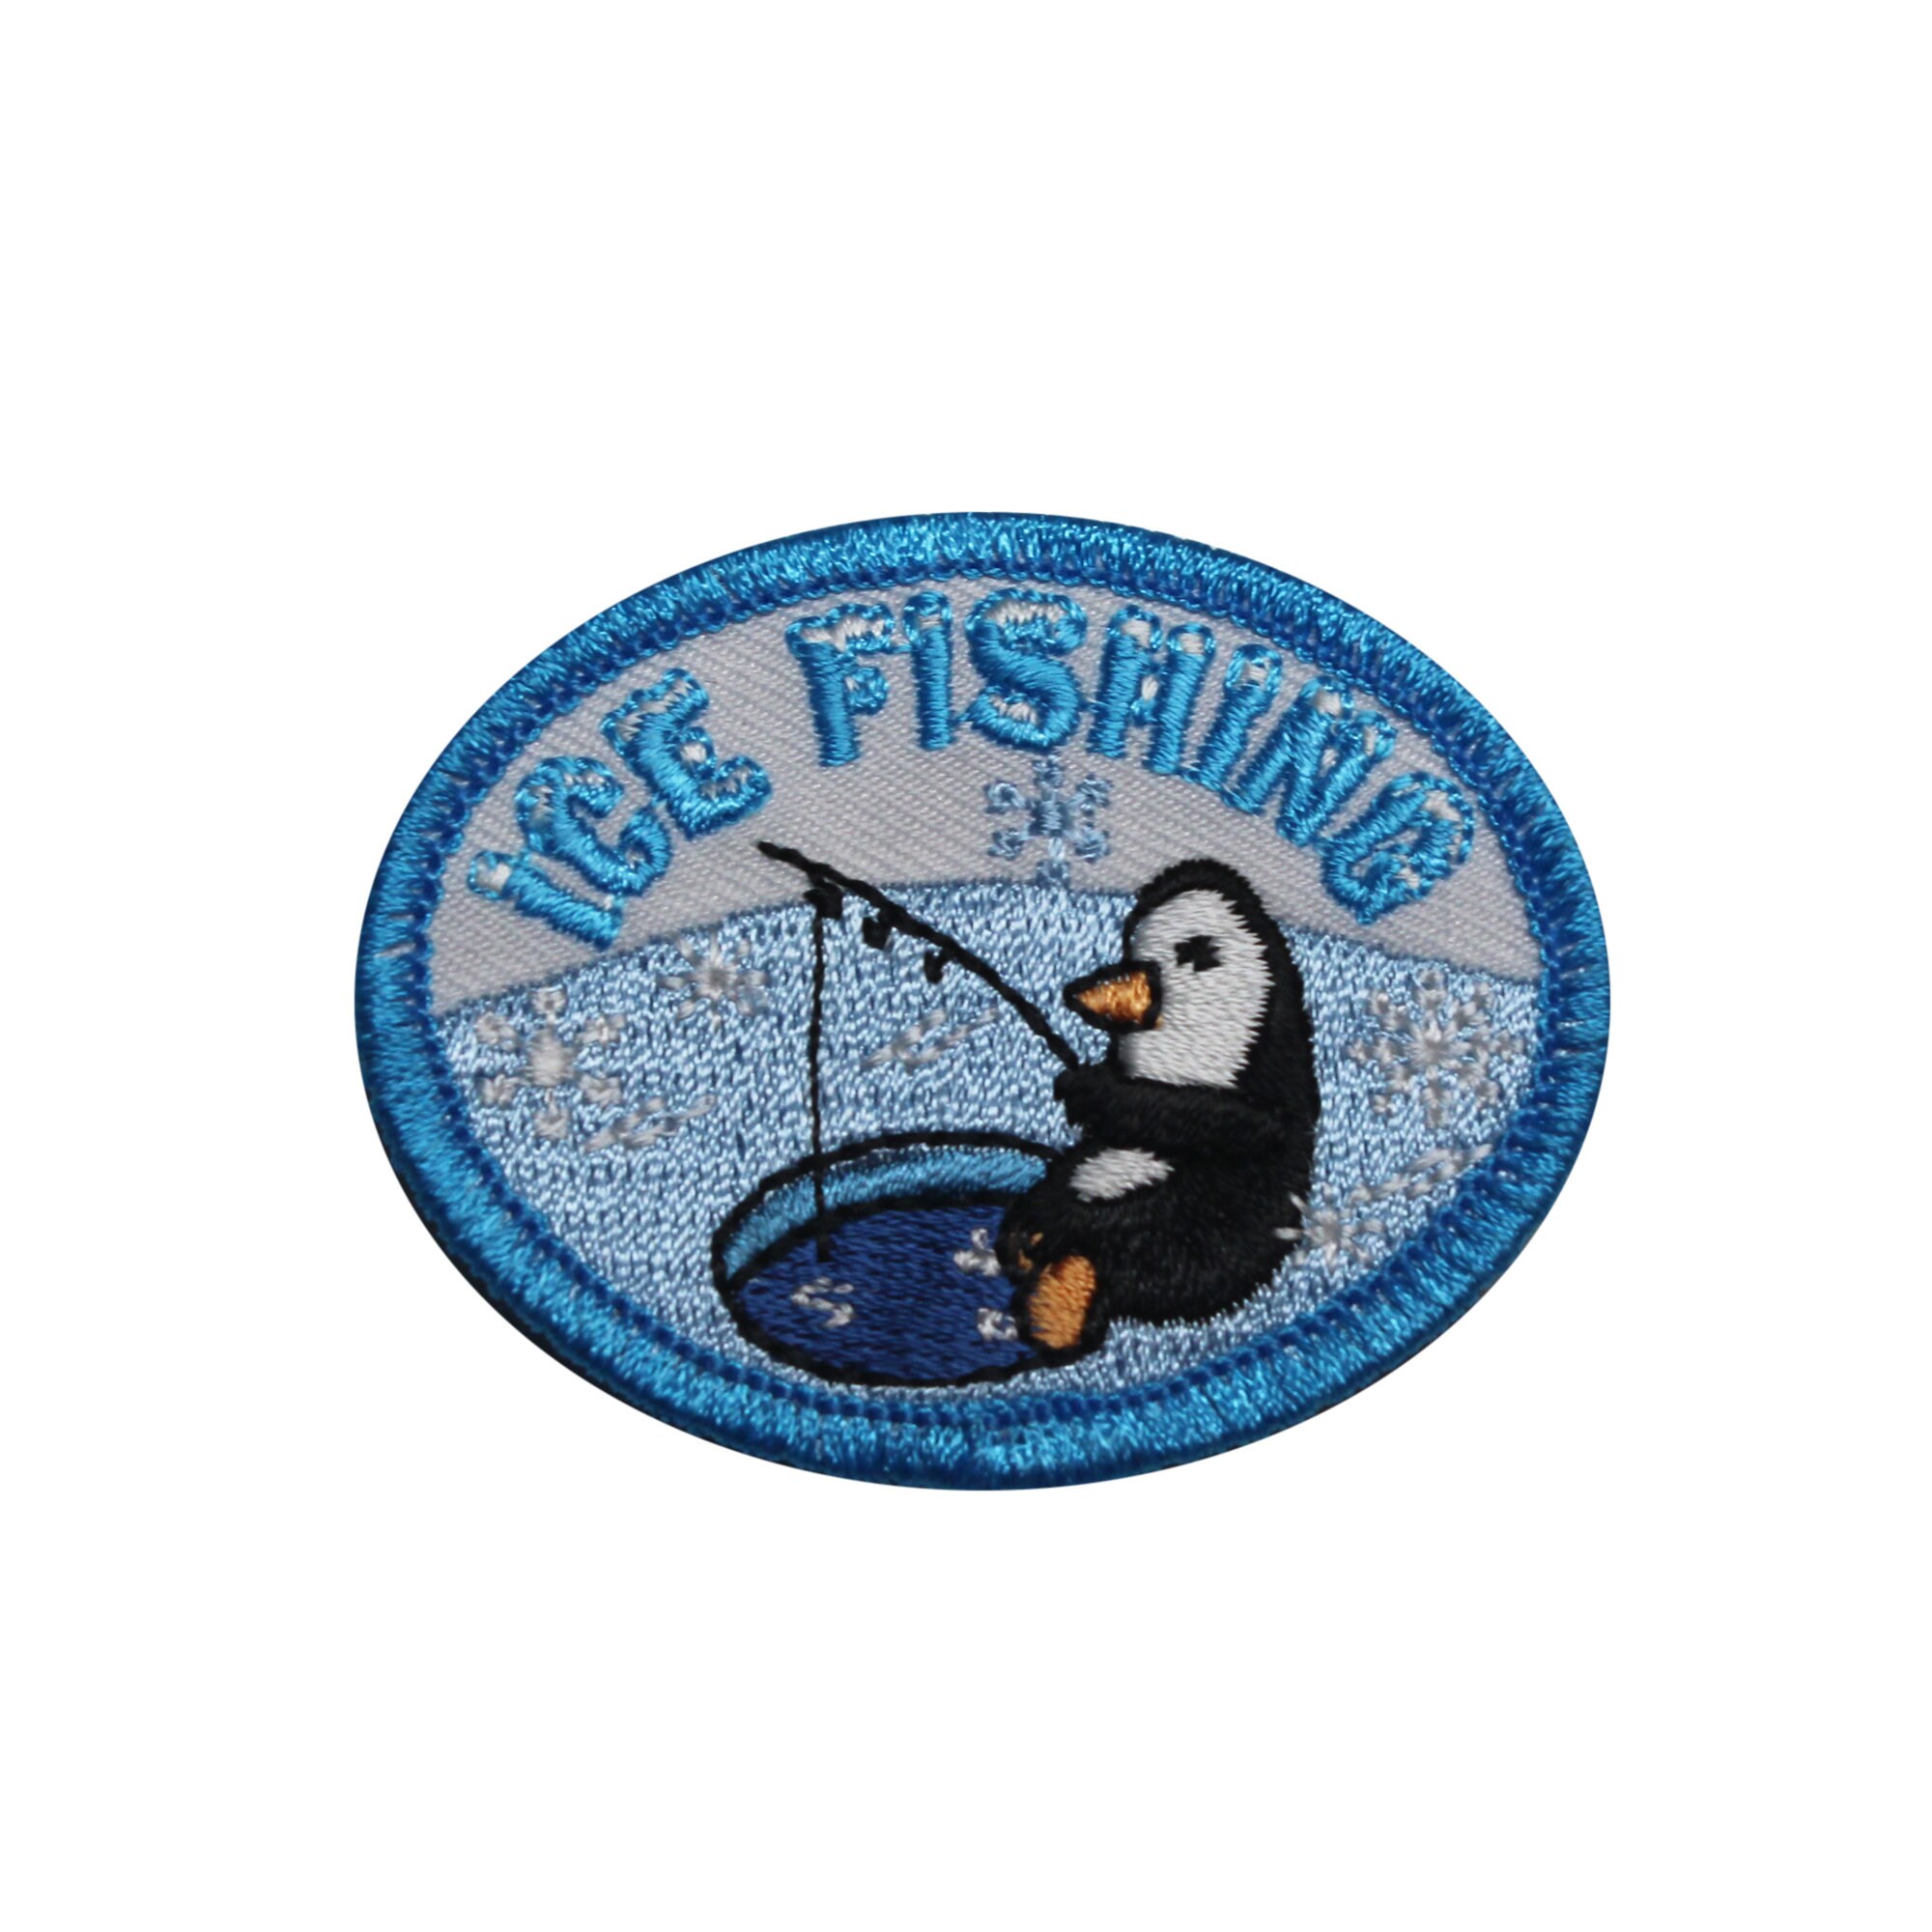 Fishing Patch Kiss My Bass Humor Iron on Patch Red Kiss Lips With a Fish  Play on Words Fishing Patch Sarcasm -  Canada